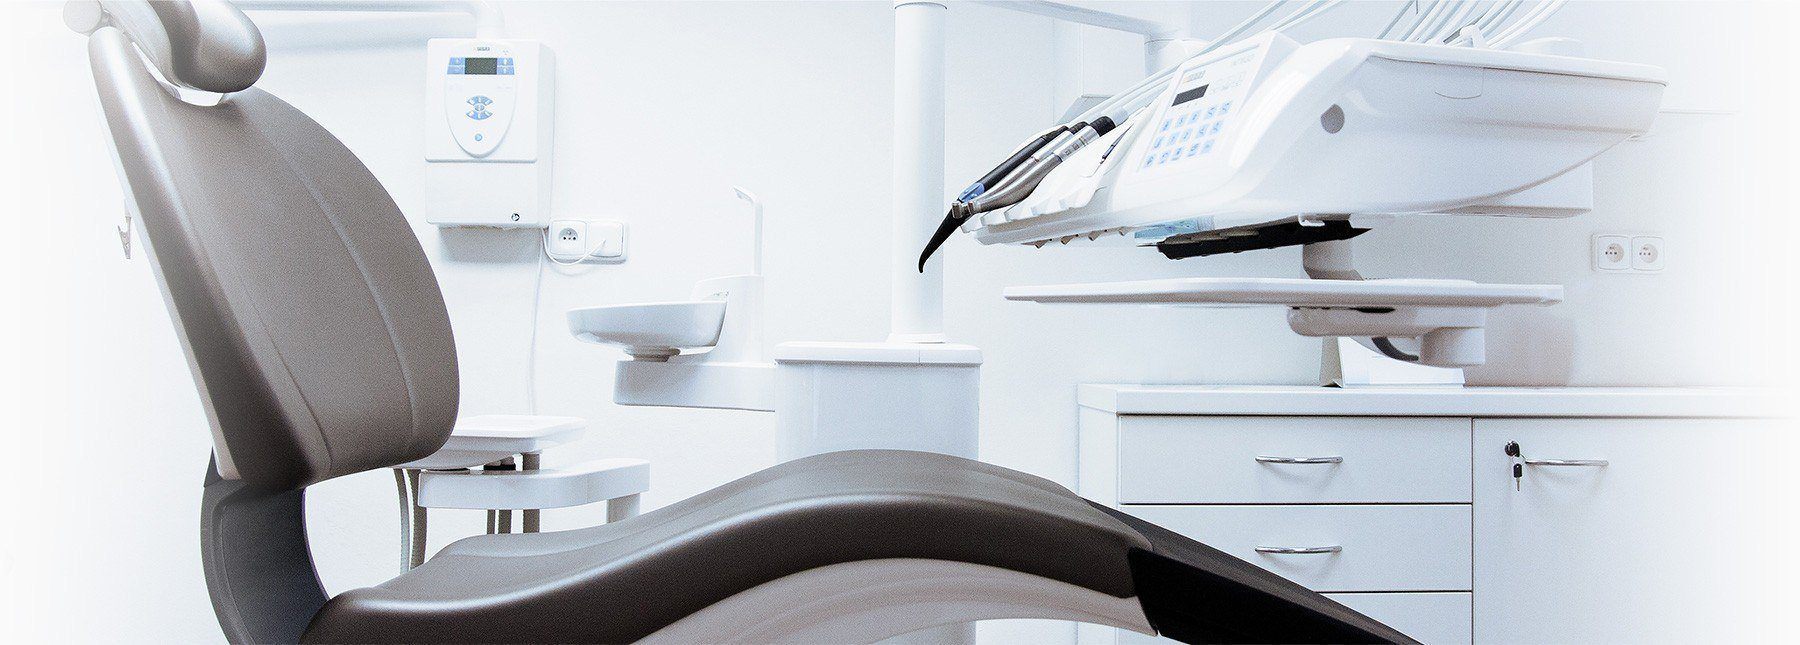 Dentist office cleaning services in NYC by SanMar building services LLC